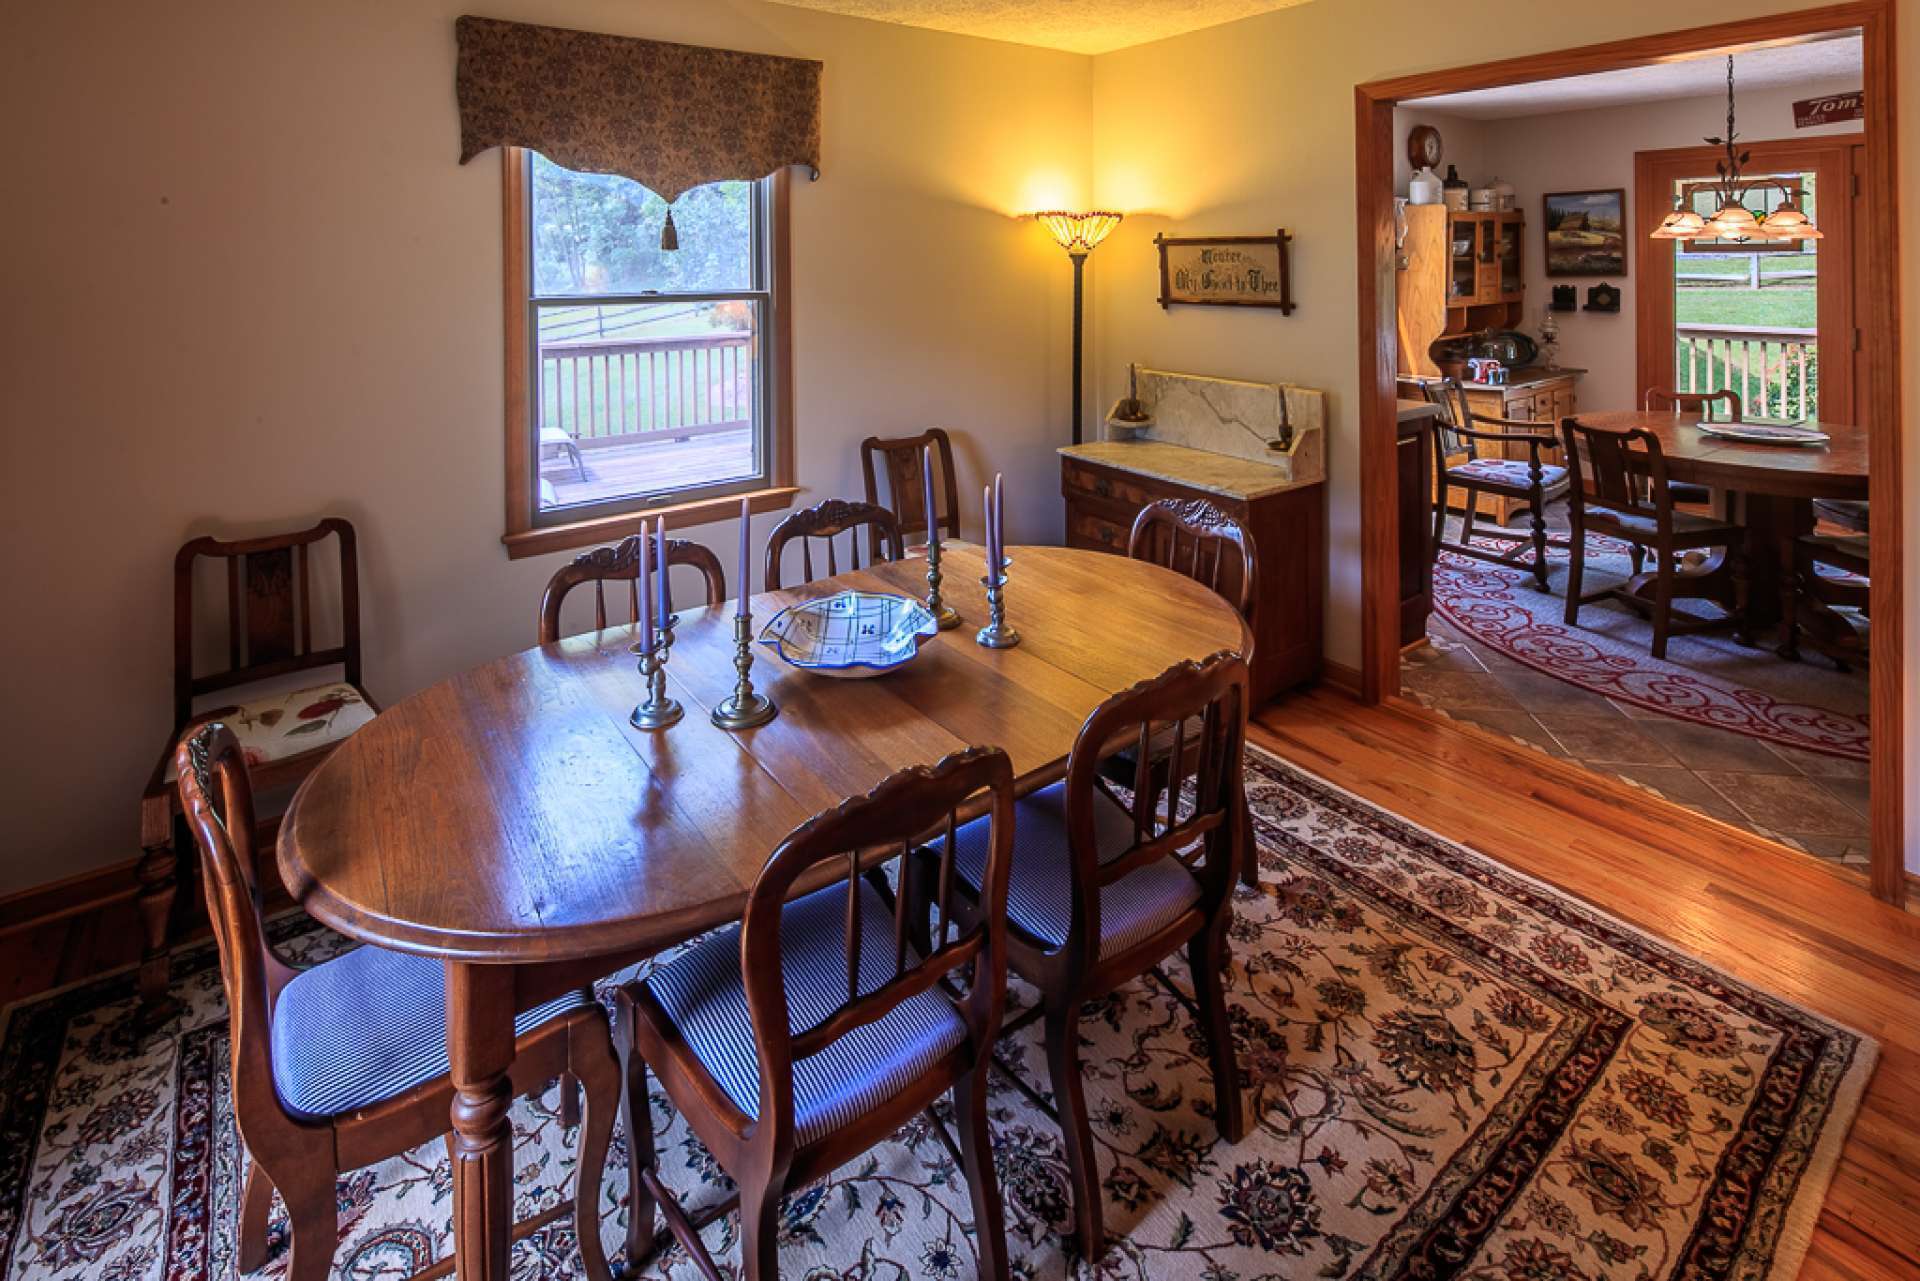 This formal dining space includes a sitting area for additional dinner guests or a quiet place to relax.